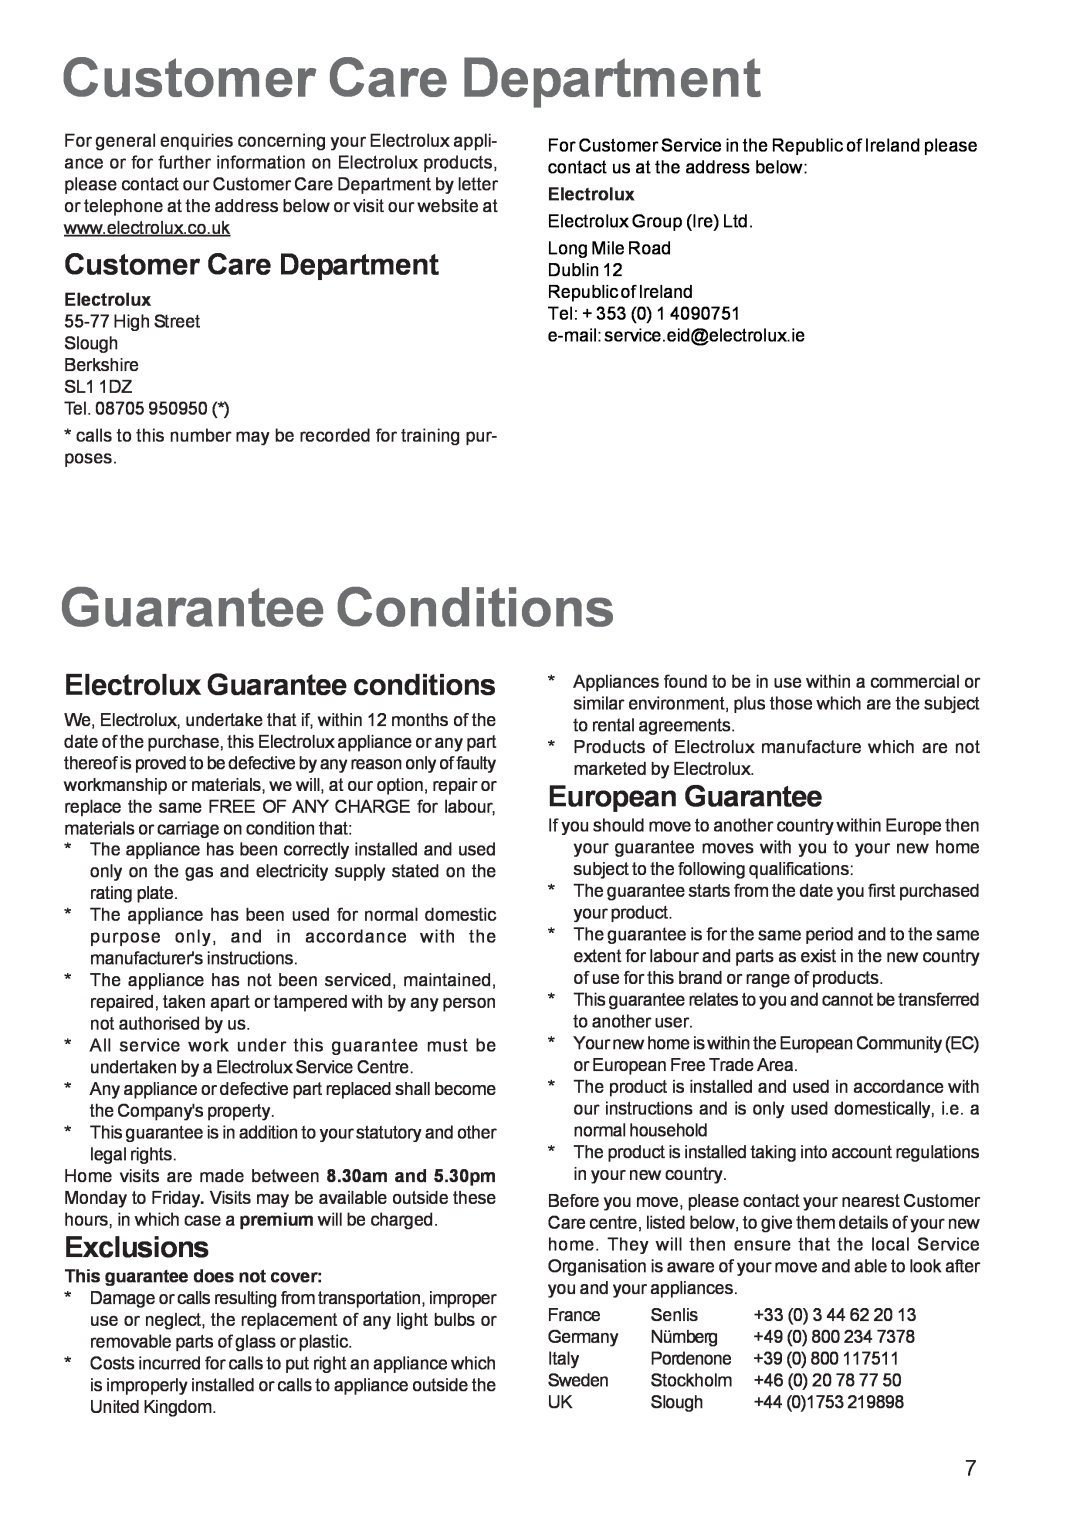 Electrolux EHG 6762 manual Customer Care Department, Guarantee Conditions, Electrolux Guarantee conditions, Exclusions 